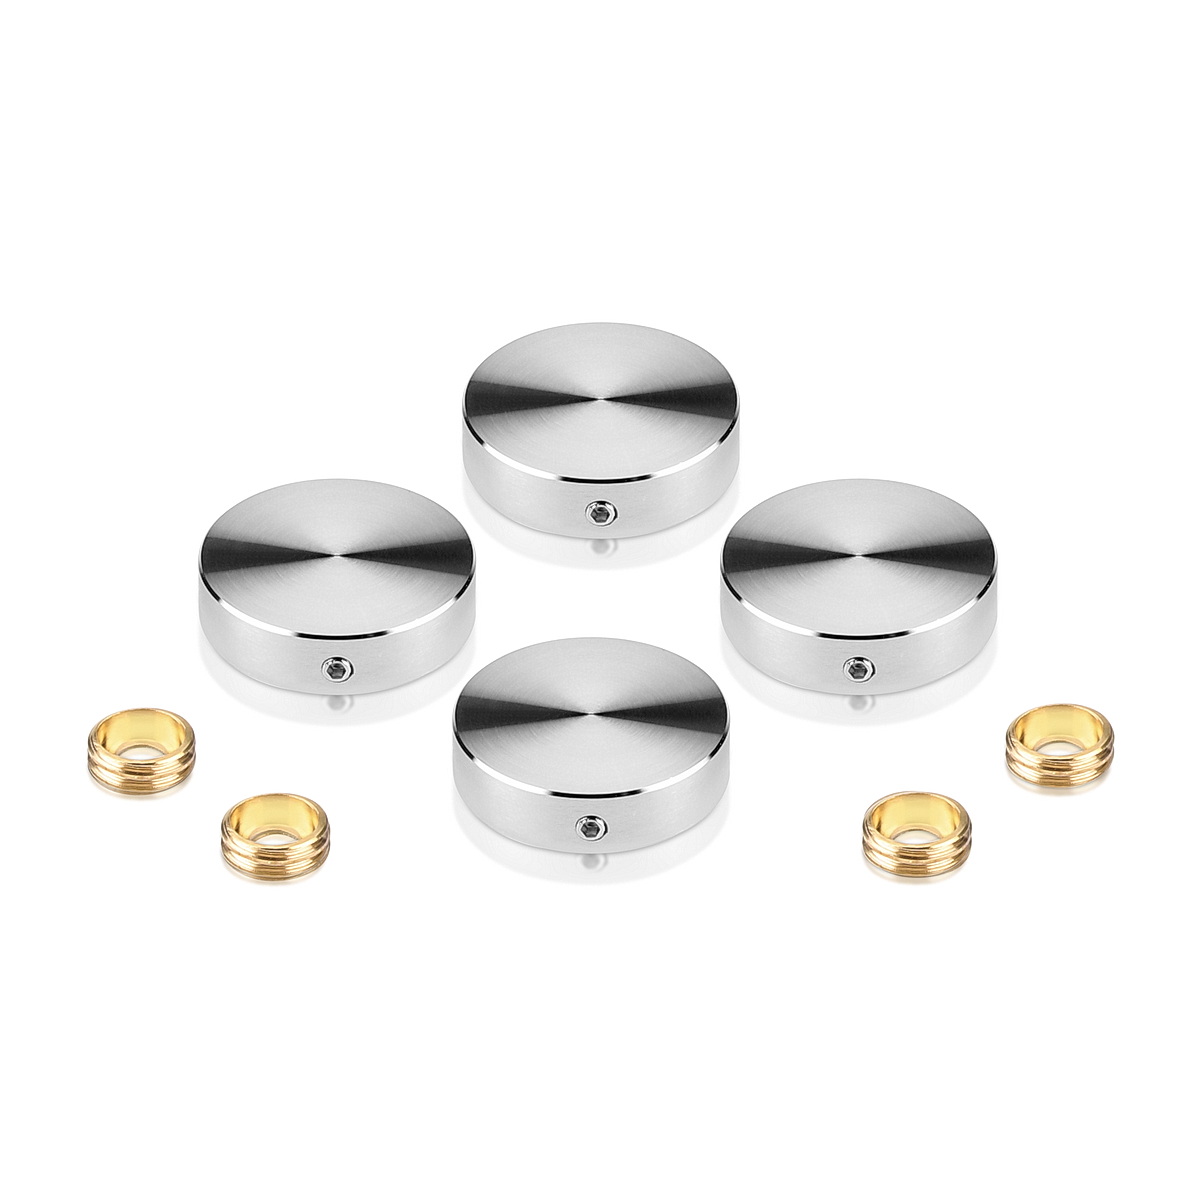 Set of 4 Locking Screw Cover Diameter 1'', Satin Brushed Stainless Steel Finish (Indoor Use Only)